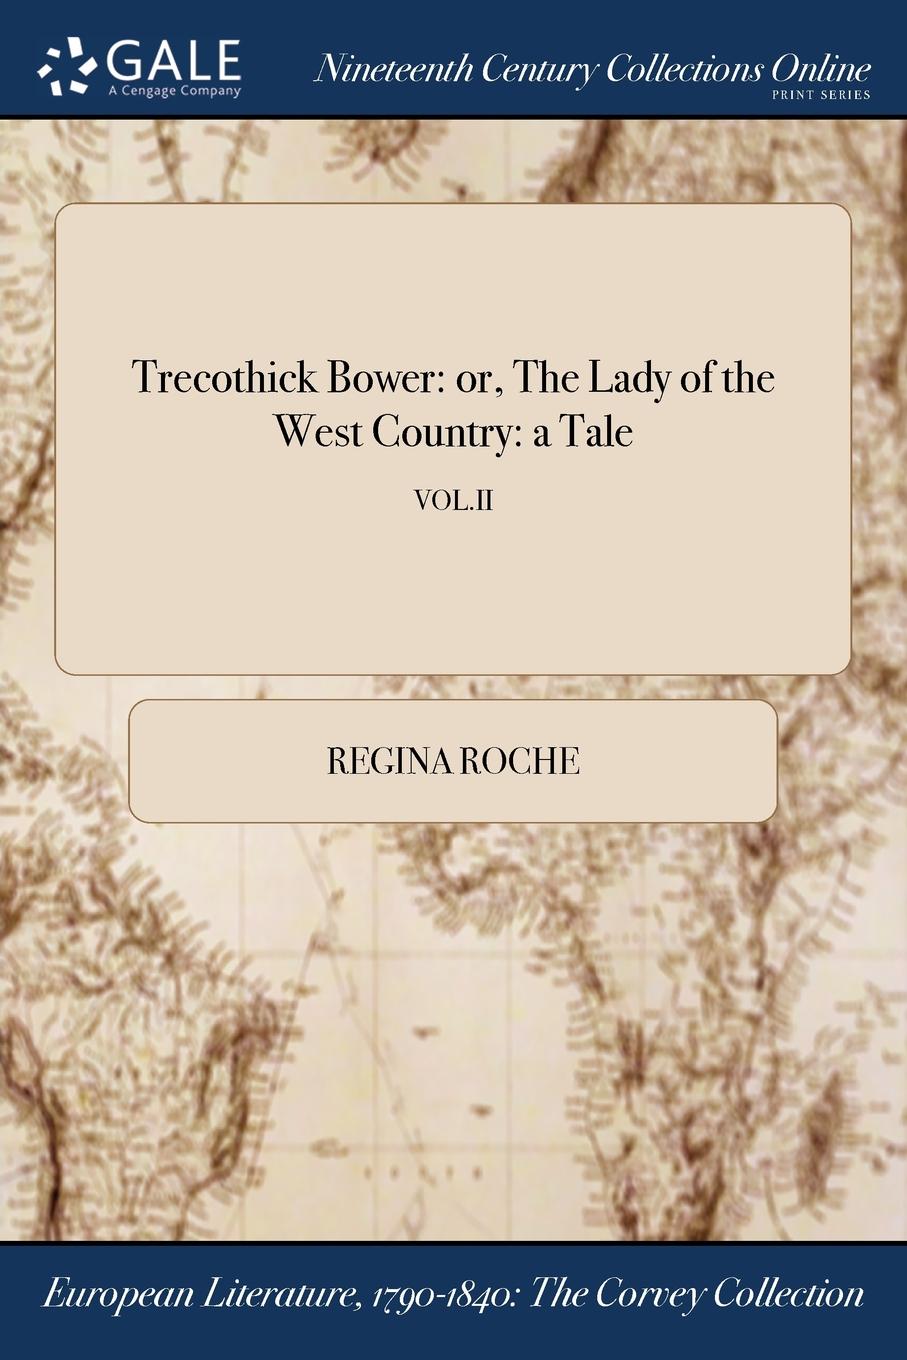 Trecothick Bower. or, The Lady of the West Country: a Tale; VOL.II